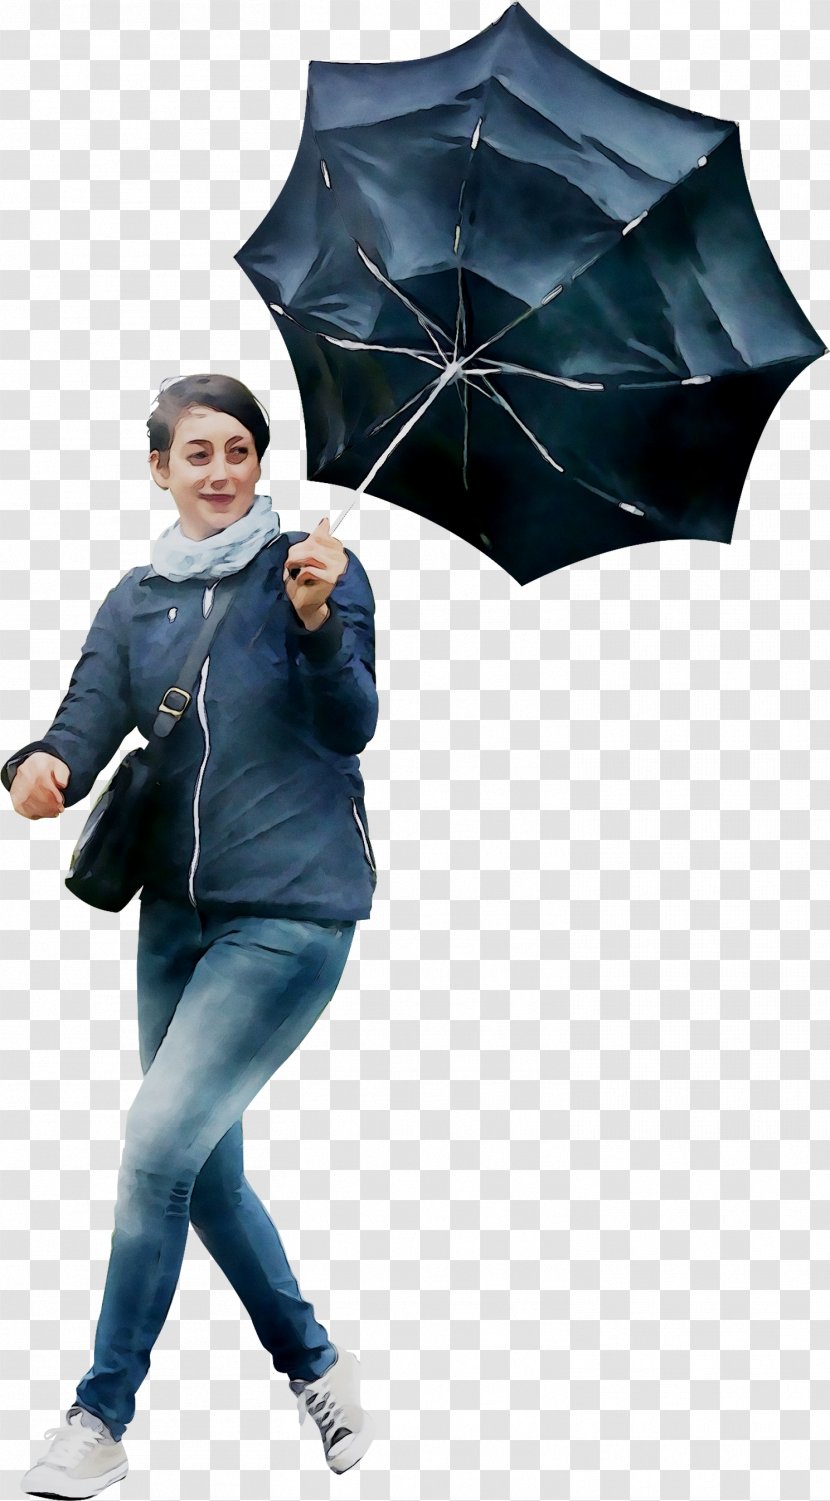 Electric Blue Outerwear - Fashion Accessory - Umbrella Transparent PNG